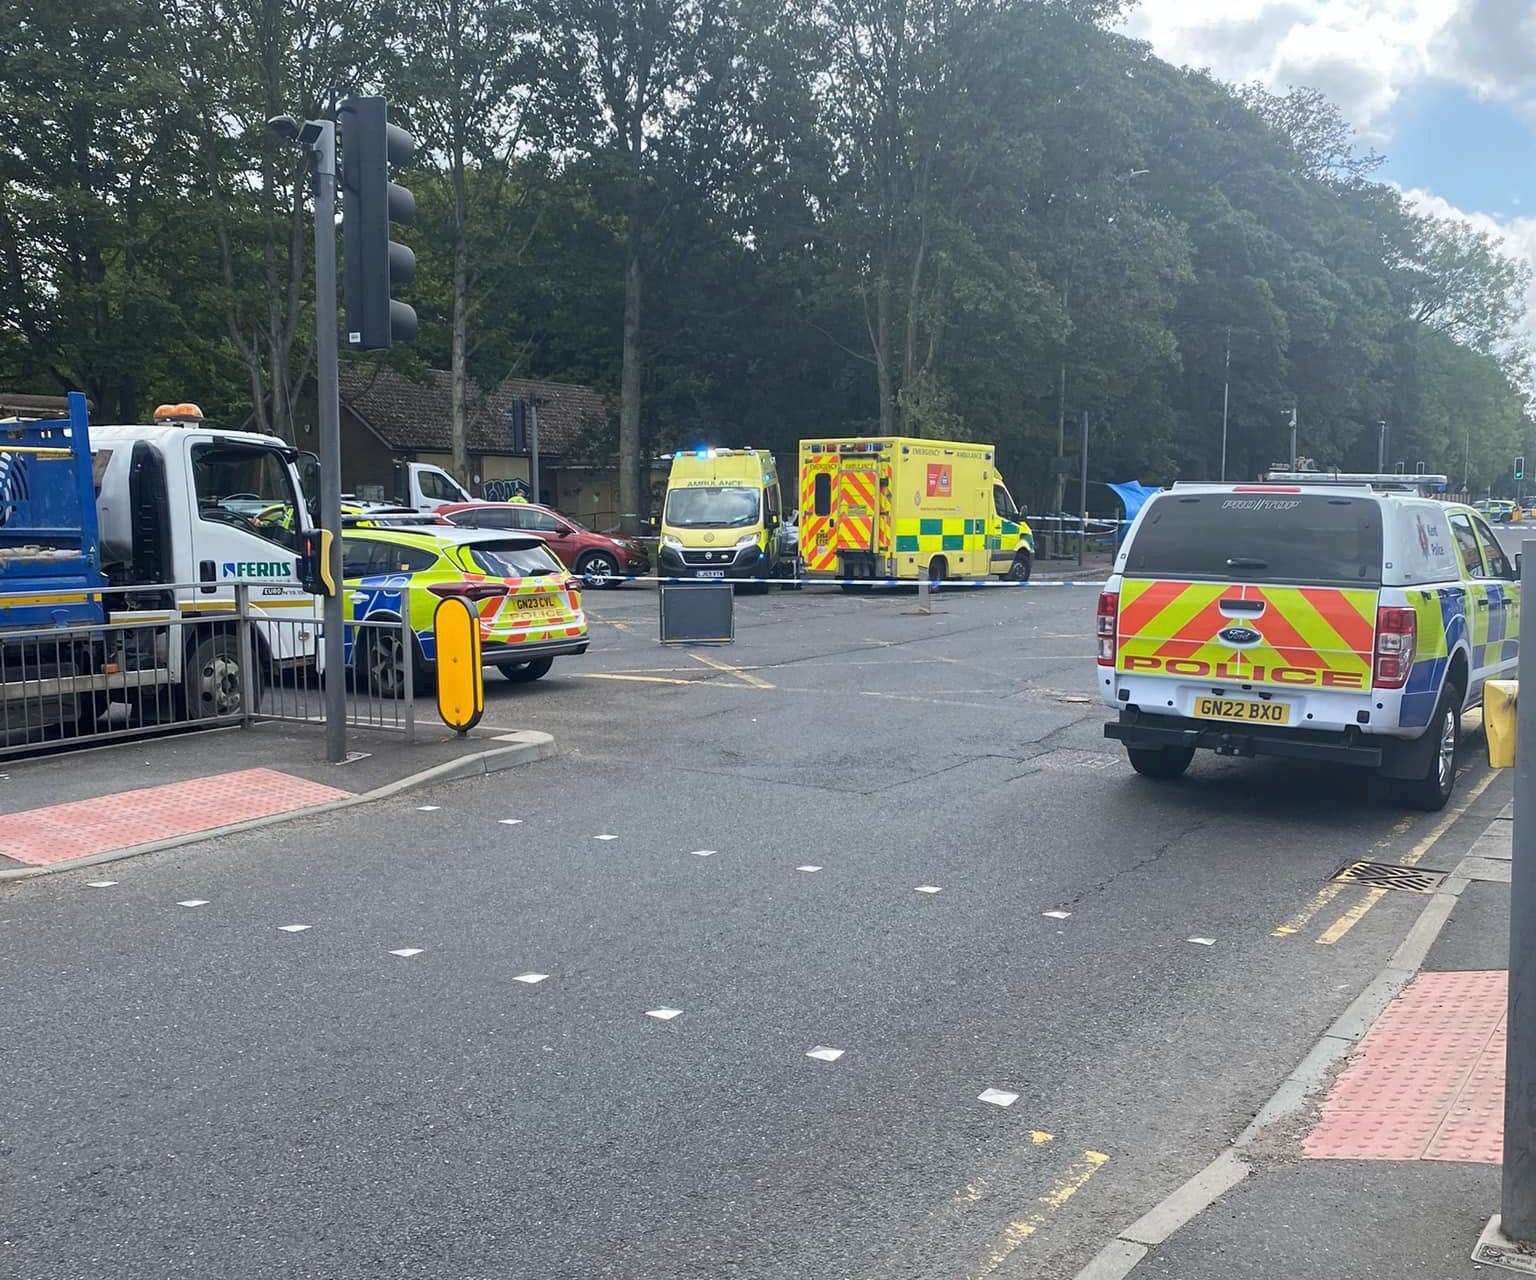 Police and paramedics were at the scene of a crash in London Road, Southborough, after an incident near Yew Tree Road. Picture: Eugenia Boylan